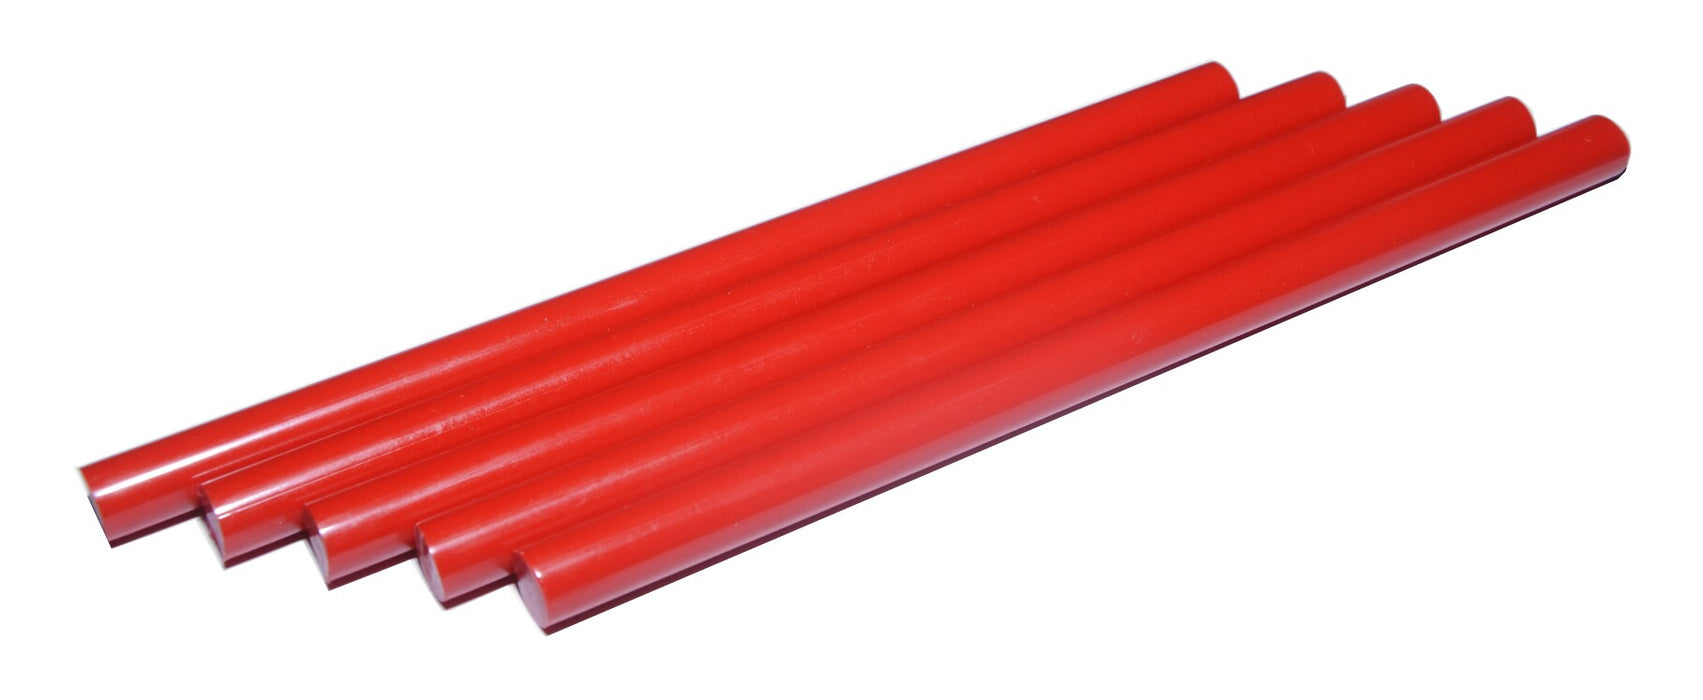 PDR hot melt adhesive red 11mm